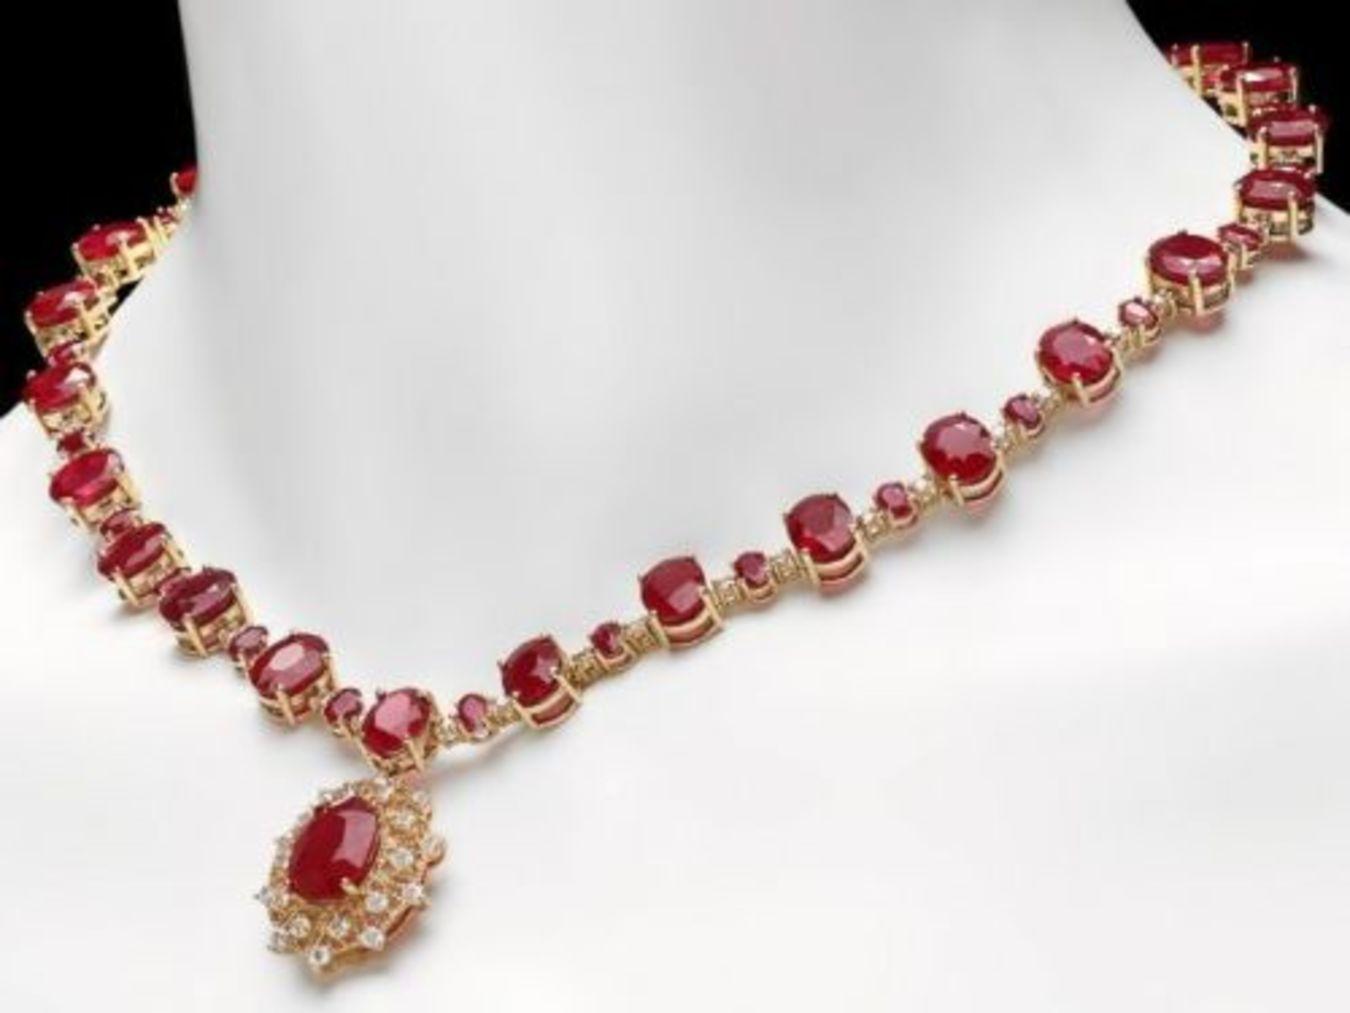 14K Yellow Gold 81.80ct Ruby and 2.85ct Diamond Necklace